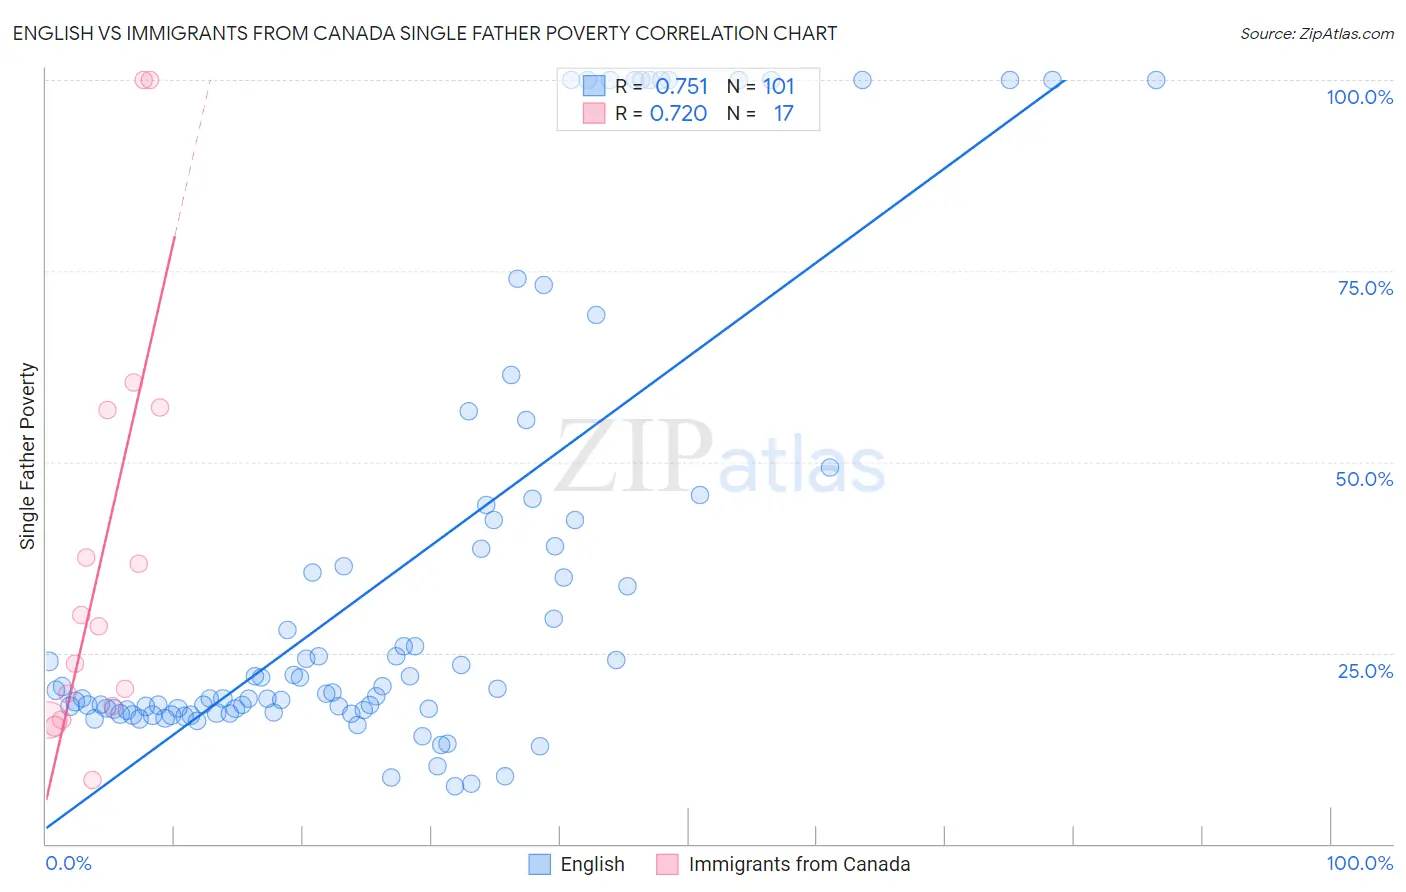 English vs Immigrants from Canada Single Father Poverty